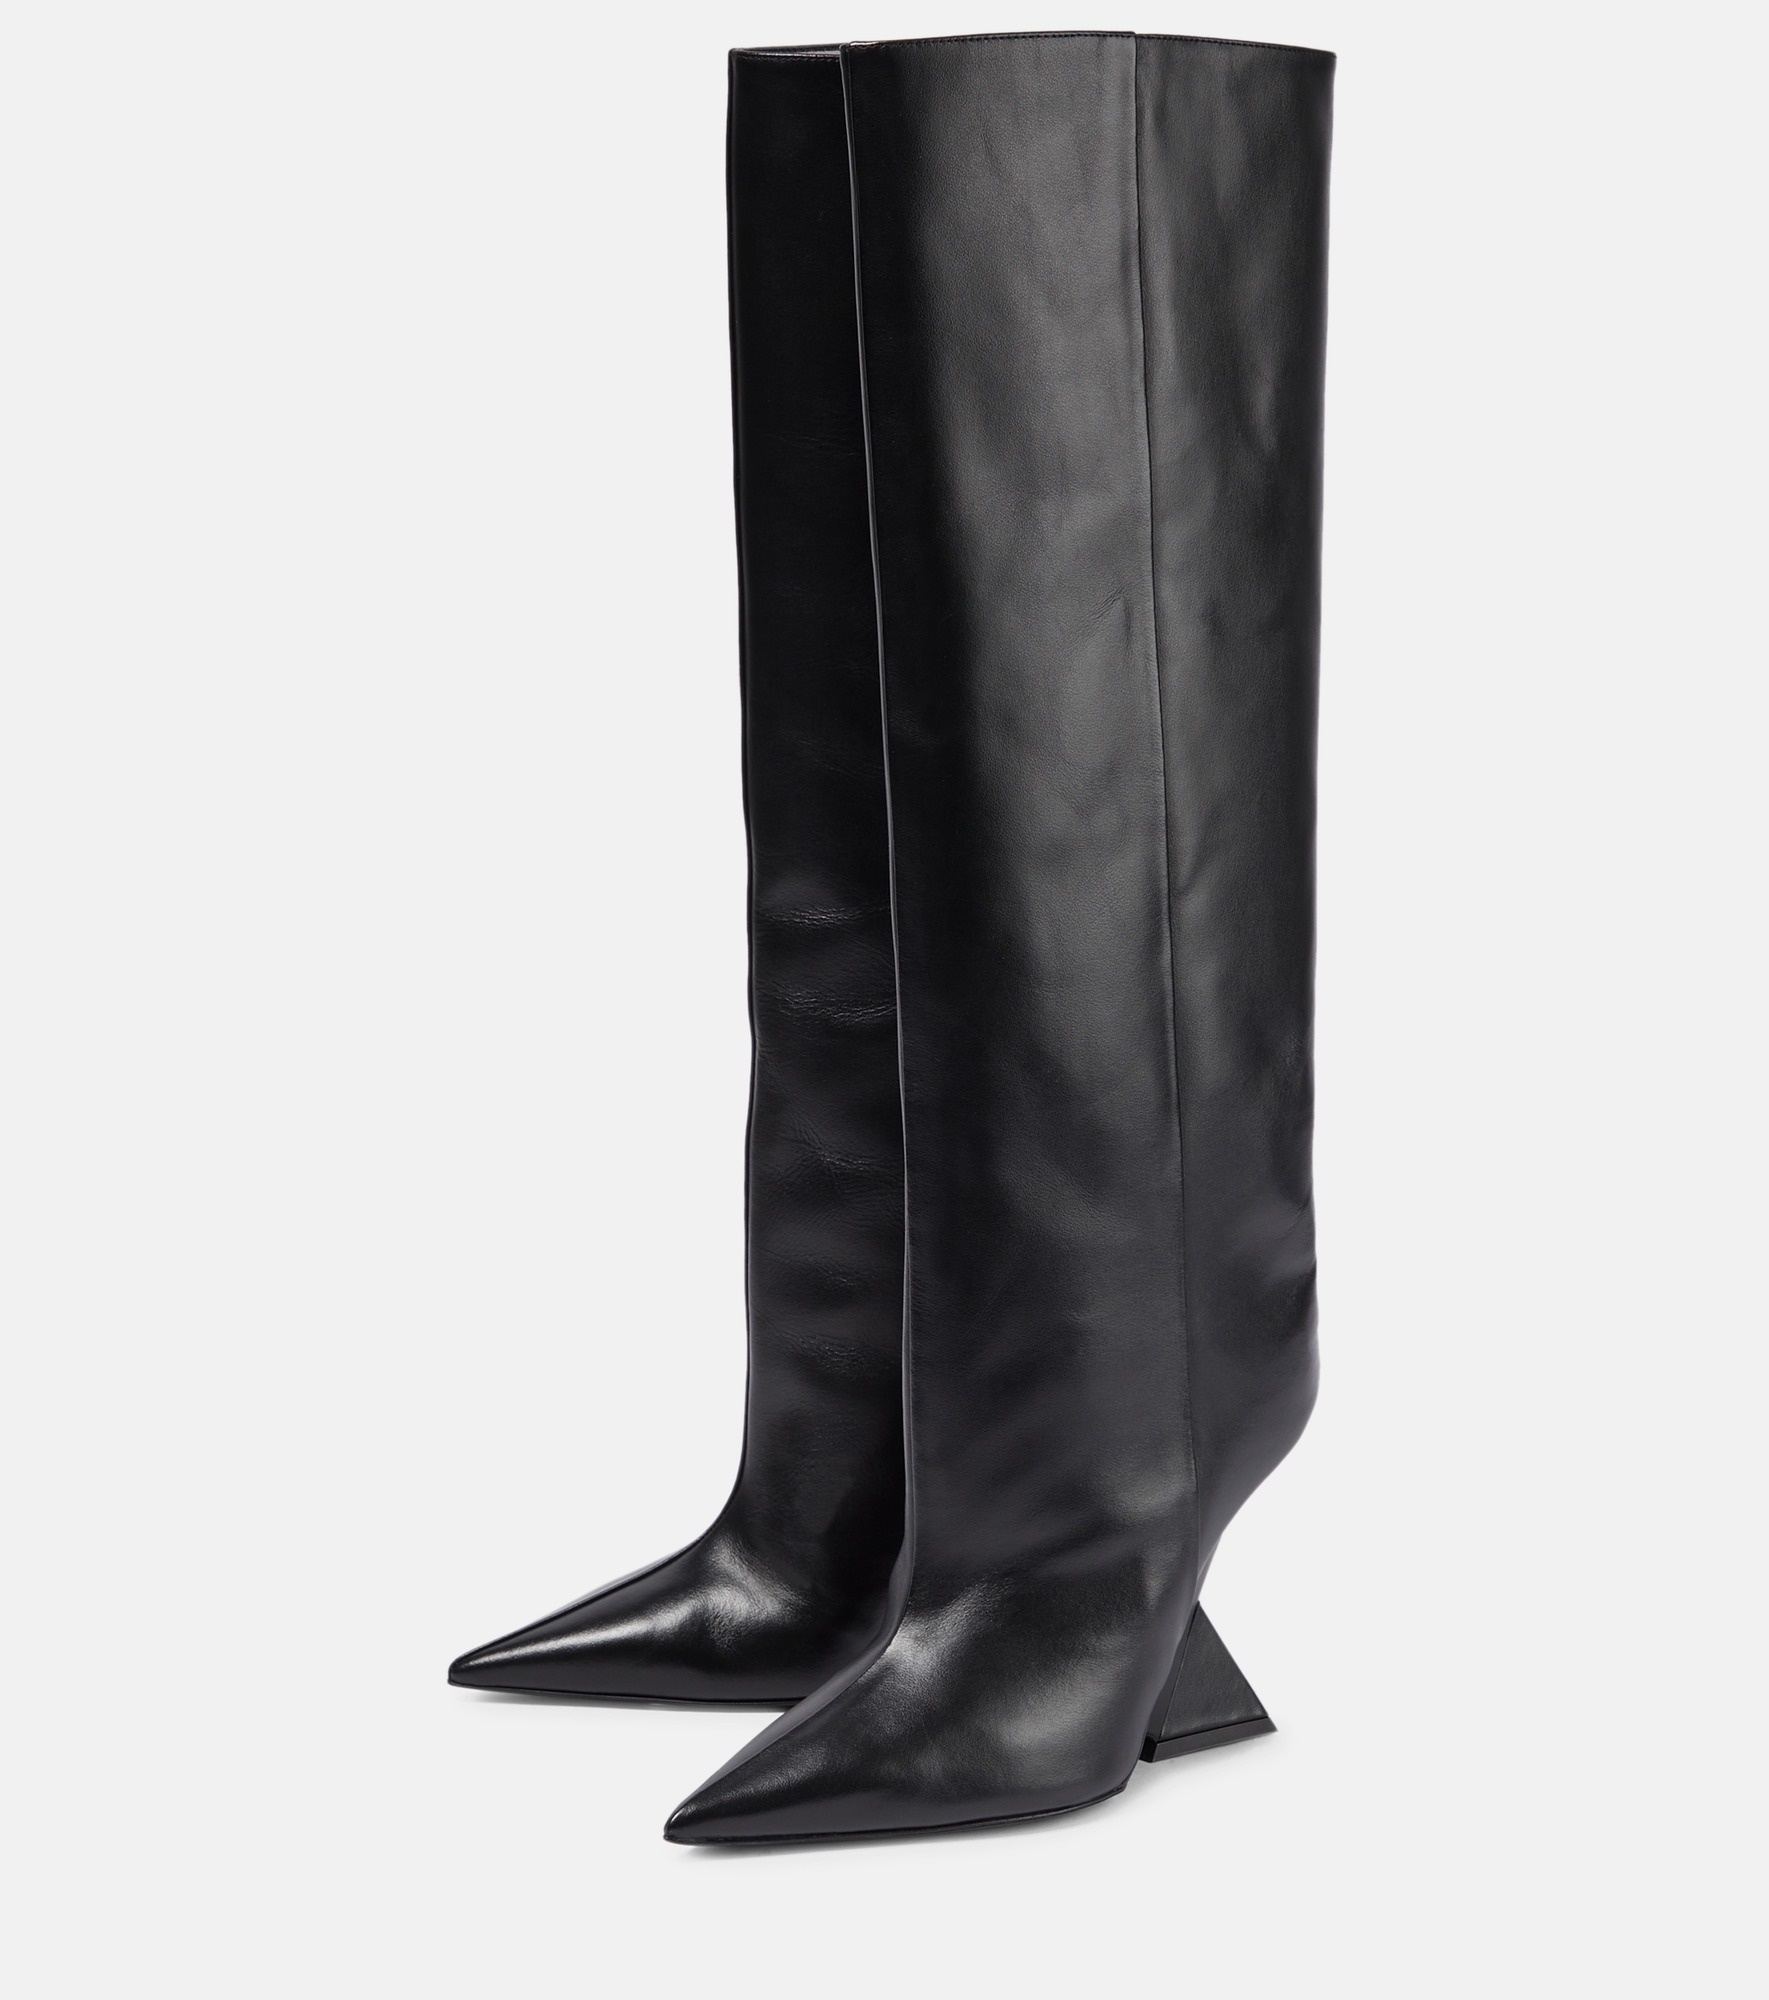 Cheope leather knee-high boots - 5